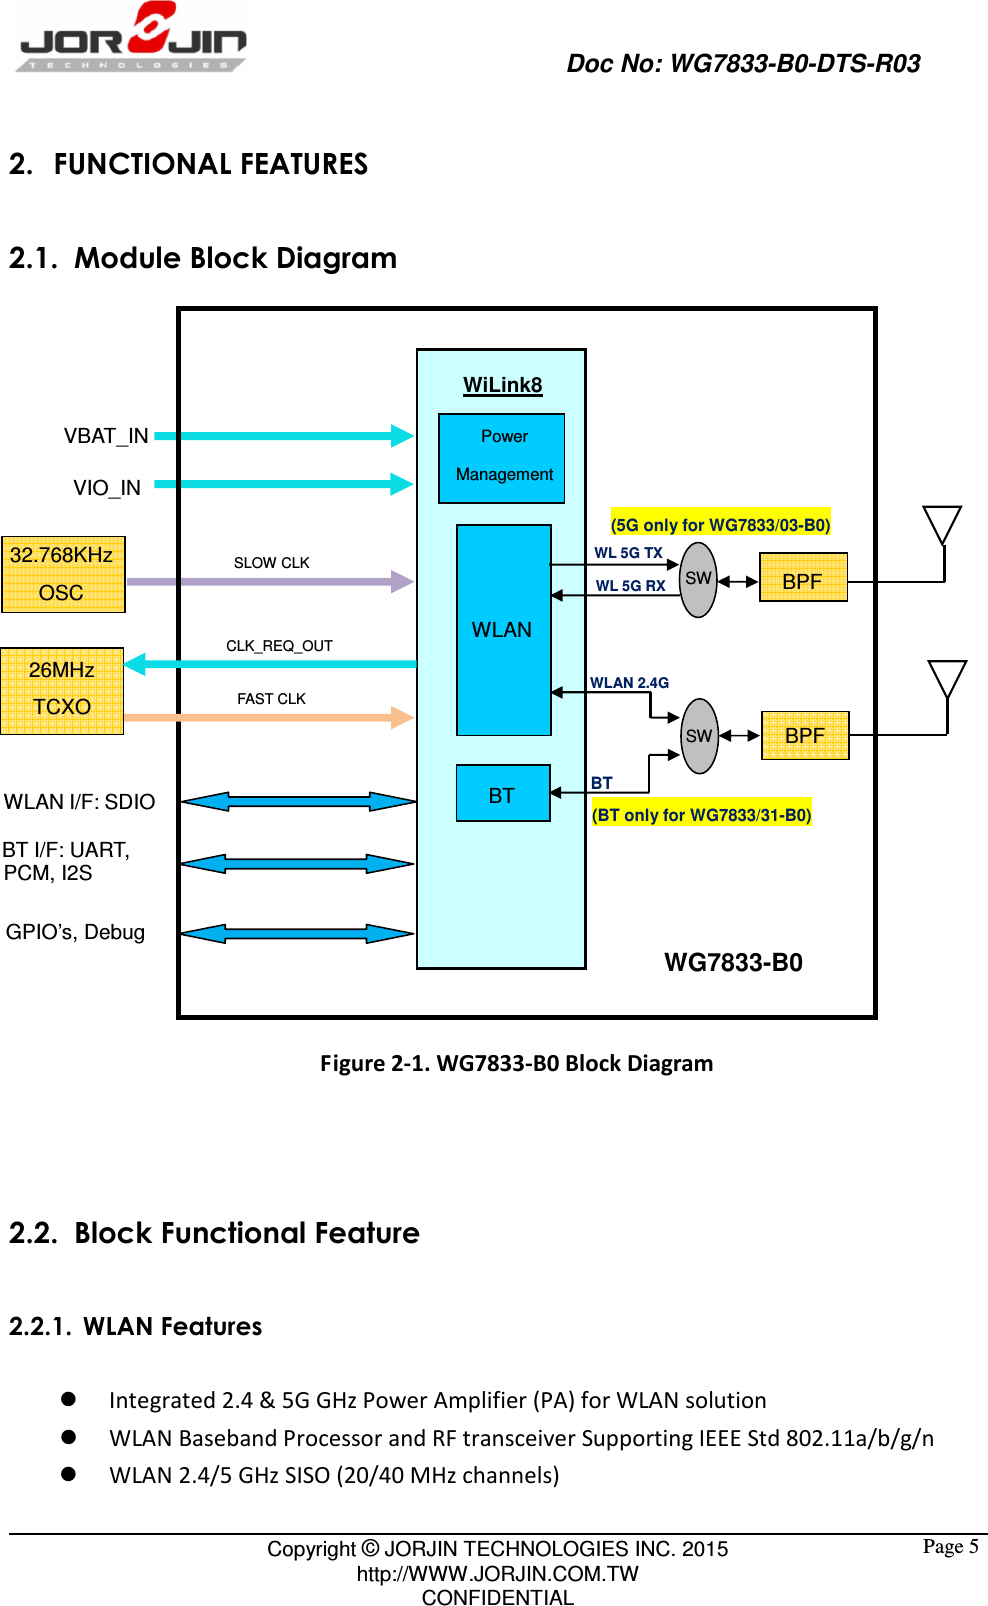                                                   Doc No: WG7833-B0-DTS-R03                                                                                                 Copyright © JORJIN TECHNOLOGIES INC. 2015 http://WWW.JORJIN.COM.TW CONFIDENTIAL  Page 52. FUNCTIONAL FEATURES 2.1.   Module Block Diagram                     Figure 2-1. WG7833-B0 Block Diagram    2.2.   Block Functional Feature 2.2.1. WLAN Features  Integrated 2.4 &amp; 5G GHz Power Amplifier (PA) for WLAN solution    WLAN Baseband Processor and RF transceiver Supporting IEEE Std 802.11a/b/g/n  WLAN 2.4/5 GHz SISO (20/40 MHz channels) WLAN BT WiLink8 SW WG7833-B0 VBAT_IN VIO_IN SLOW CLK BT I/F: UART, WLAN I/F: SDIOPCM, I2S GPIO’s, Debug SW WLAN 2.4G WL 5G TX WL 5G RX 32.768KHz OSC BPF BPF BT (5G only for WG7833/03-B0) (BT only for WG7833/31-B0) 26MHz TCXO CLK_REQ_OUT Power Management FAST CLK 